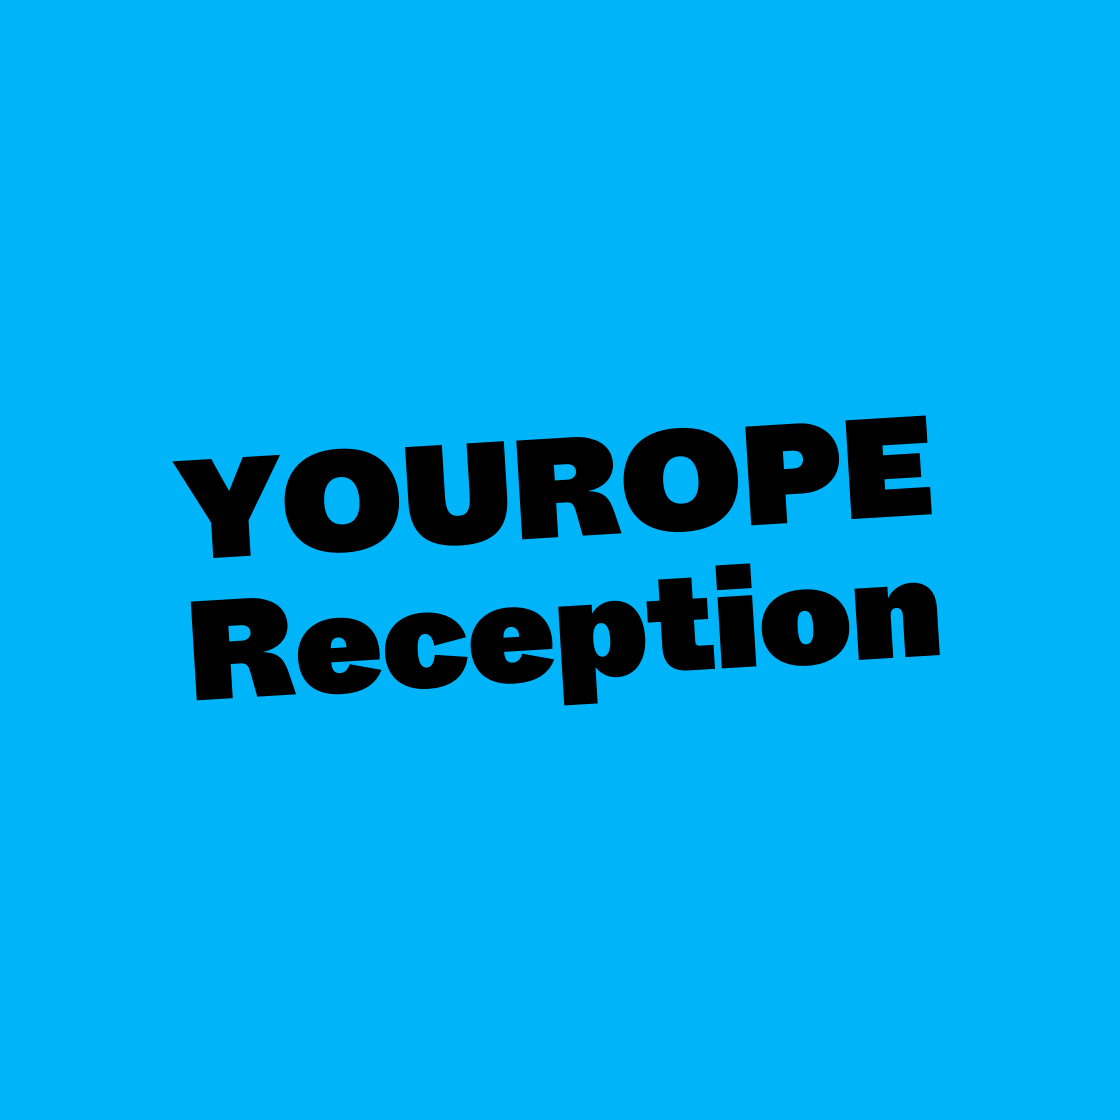 YOUROPE Reception